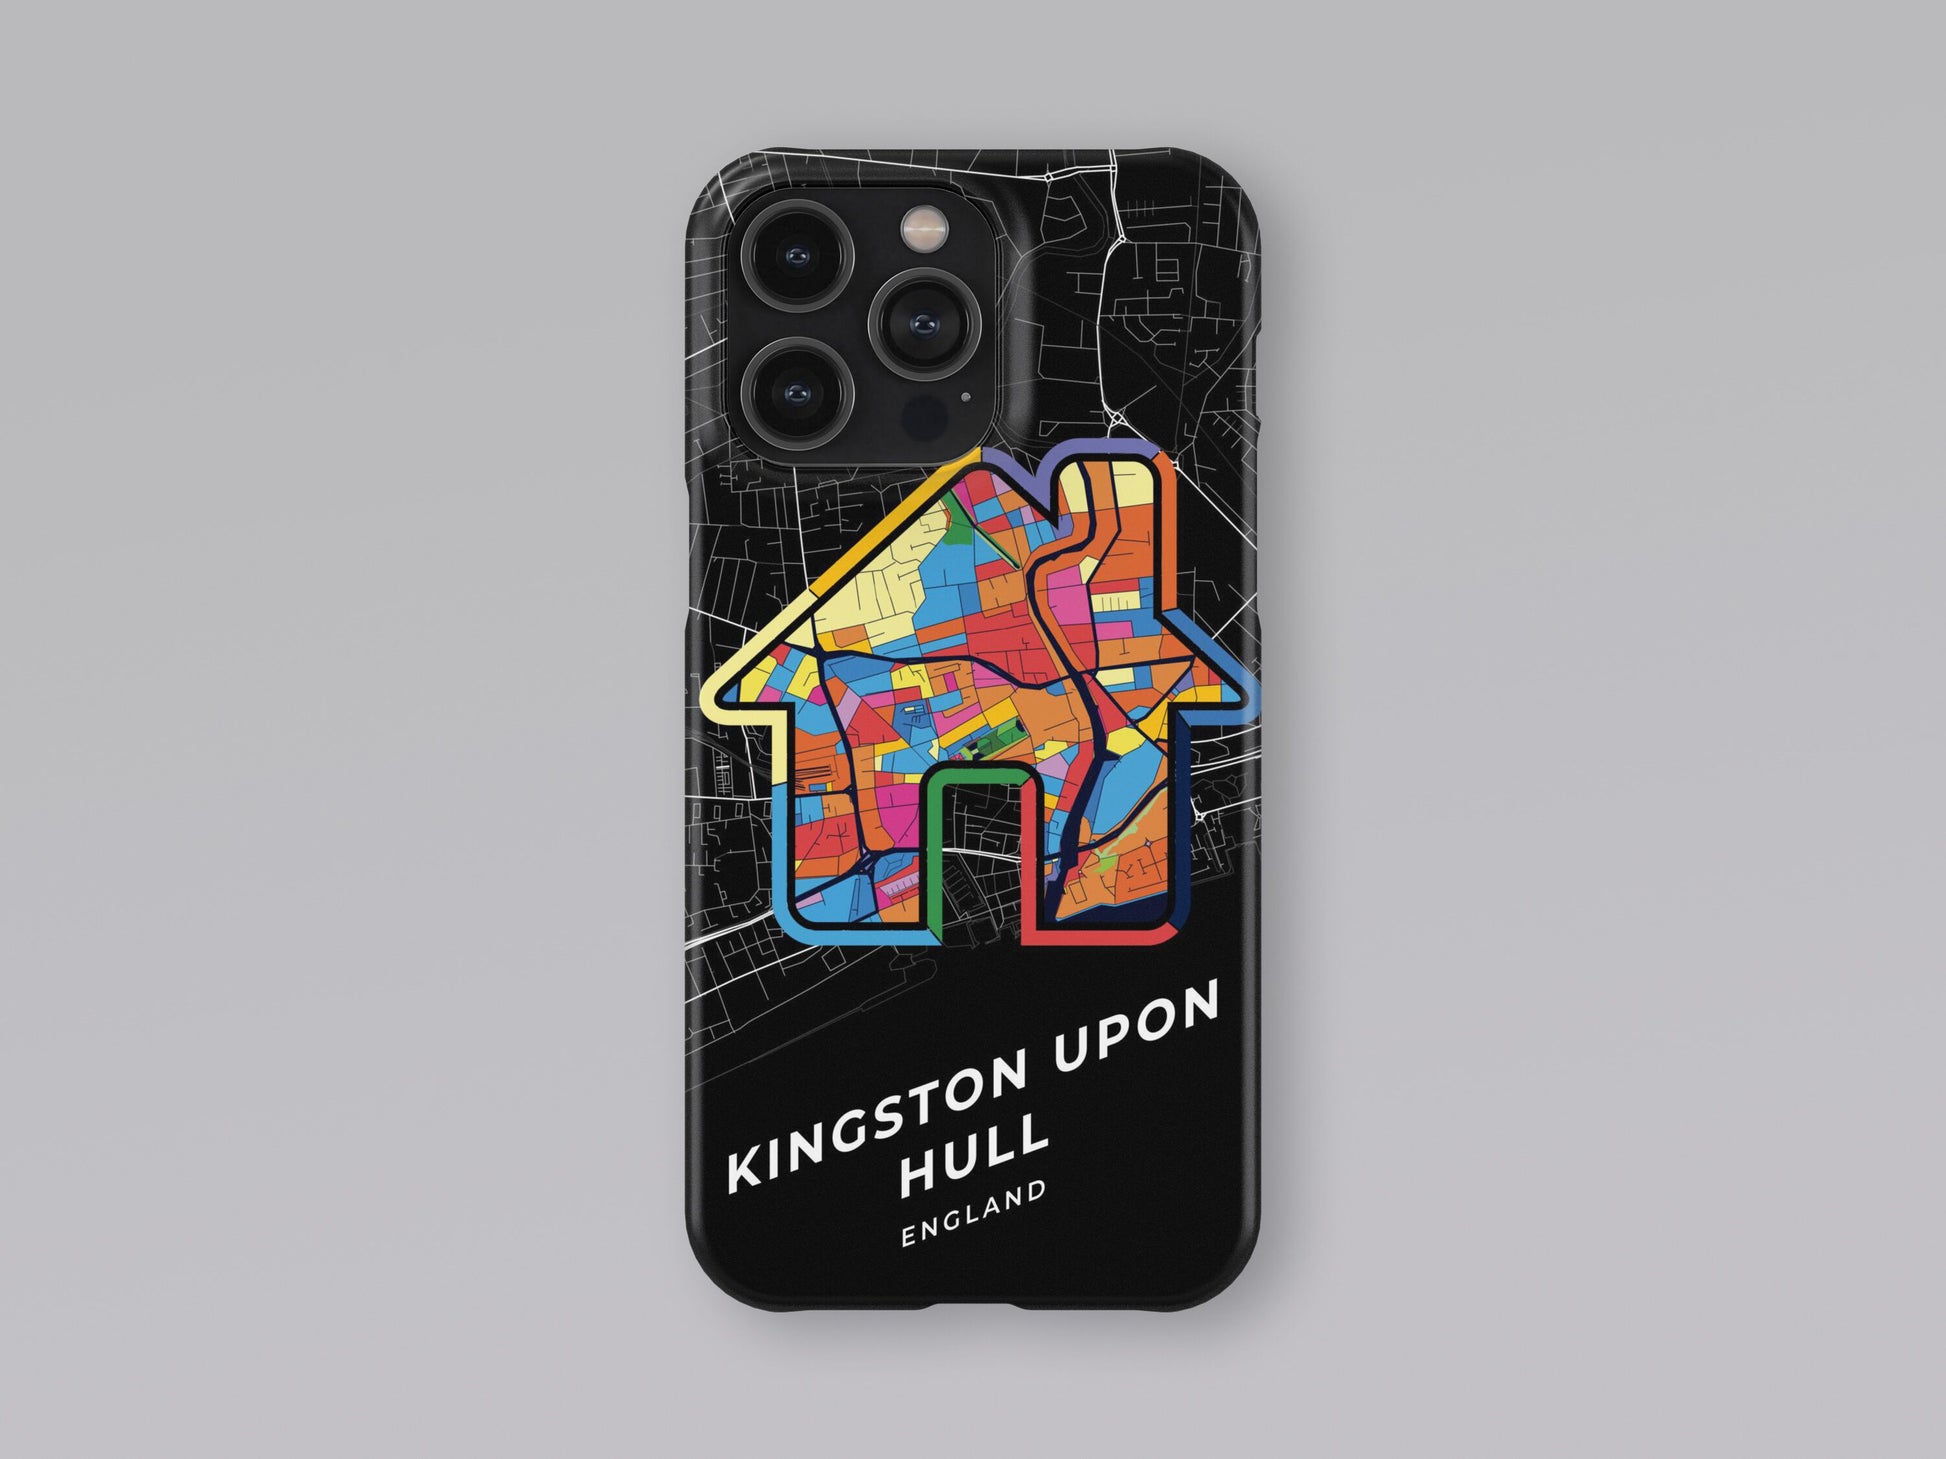 Kingston Upon Hull England slim phone case with colorful icon. Birthday, wedding or housewarming gift. Couple match cases. 3